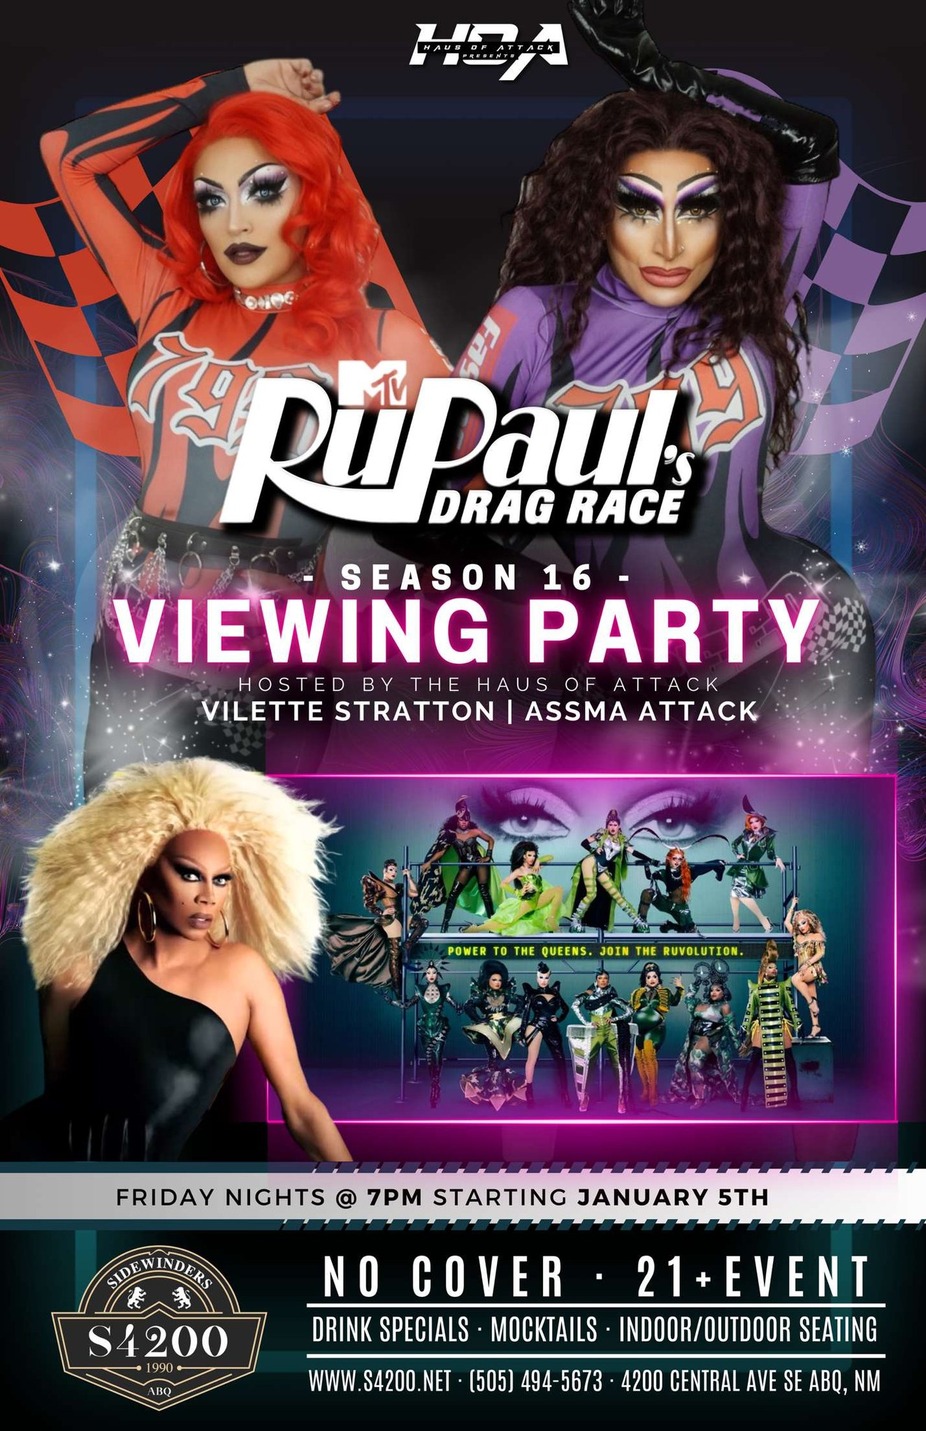 RuPaul's Drag Race Viewing Part event photo